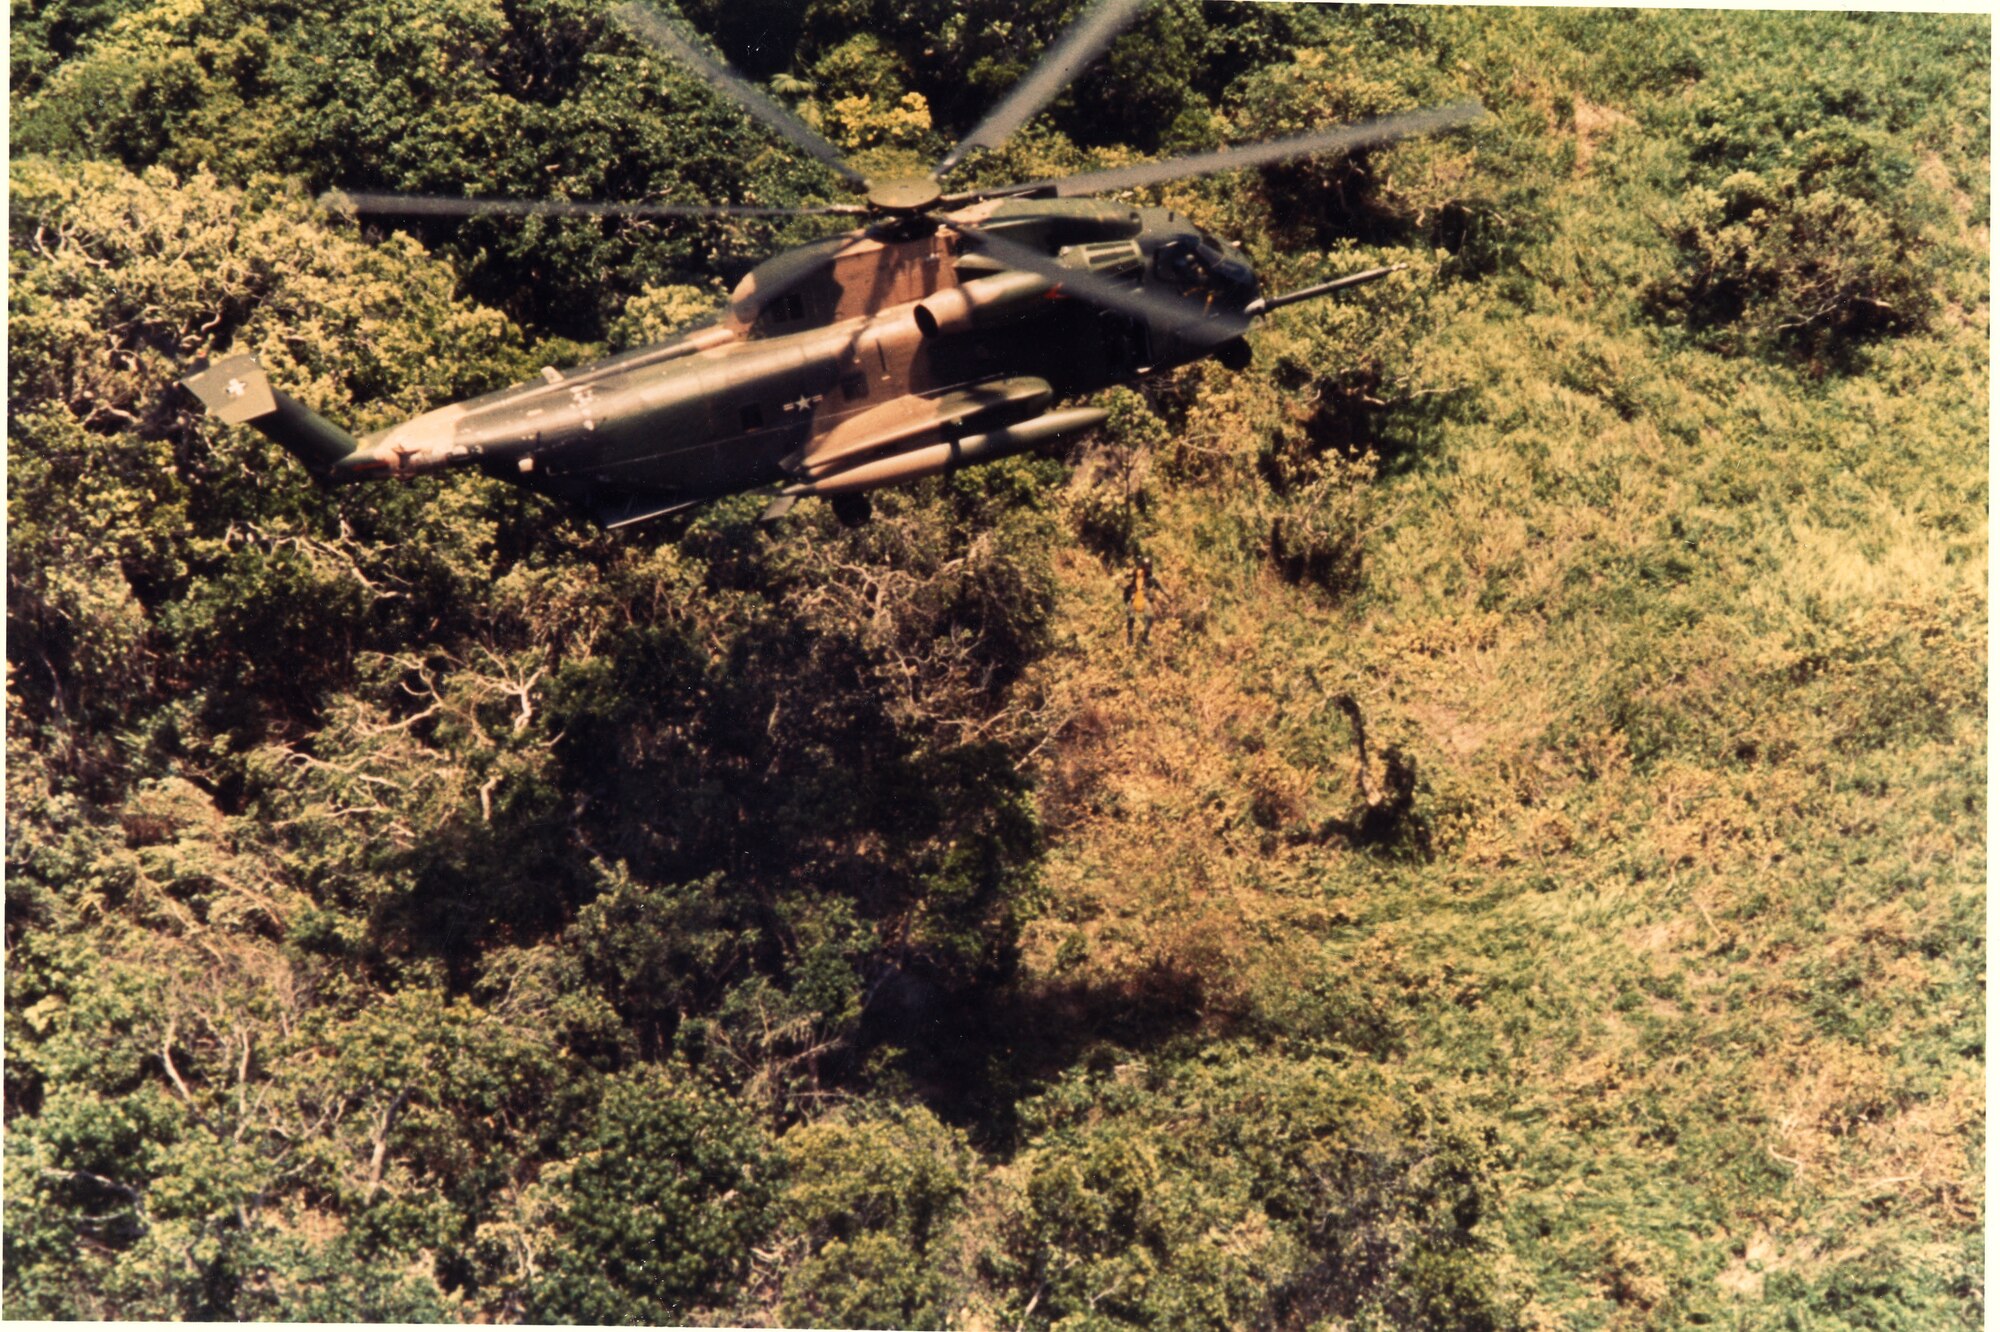 A PJ is lowered on a forest penetrator from a hovering HH-53 during a rescue mission in SEA, June 1970.